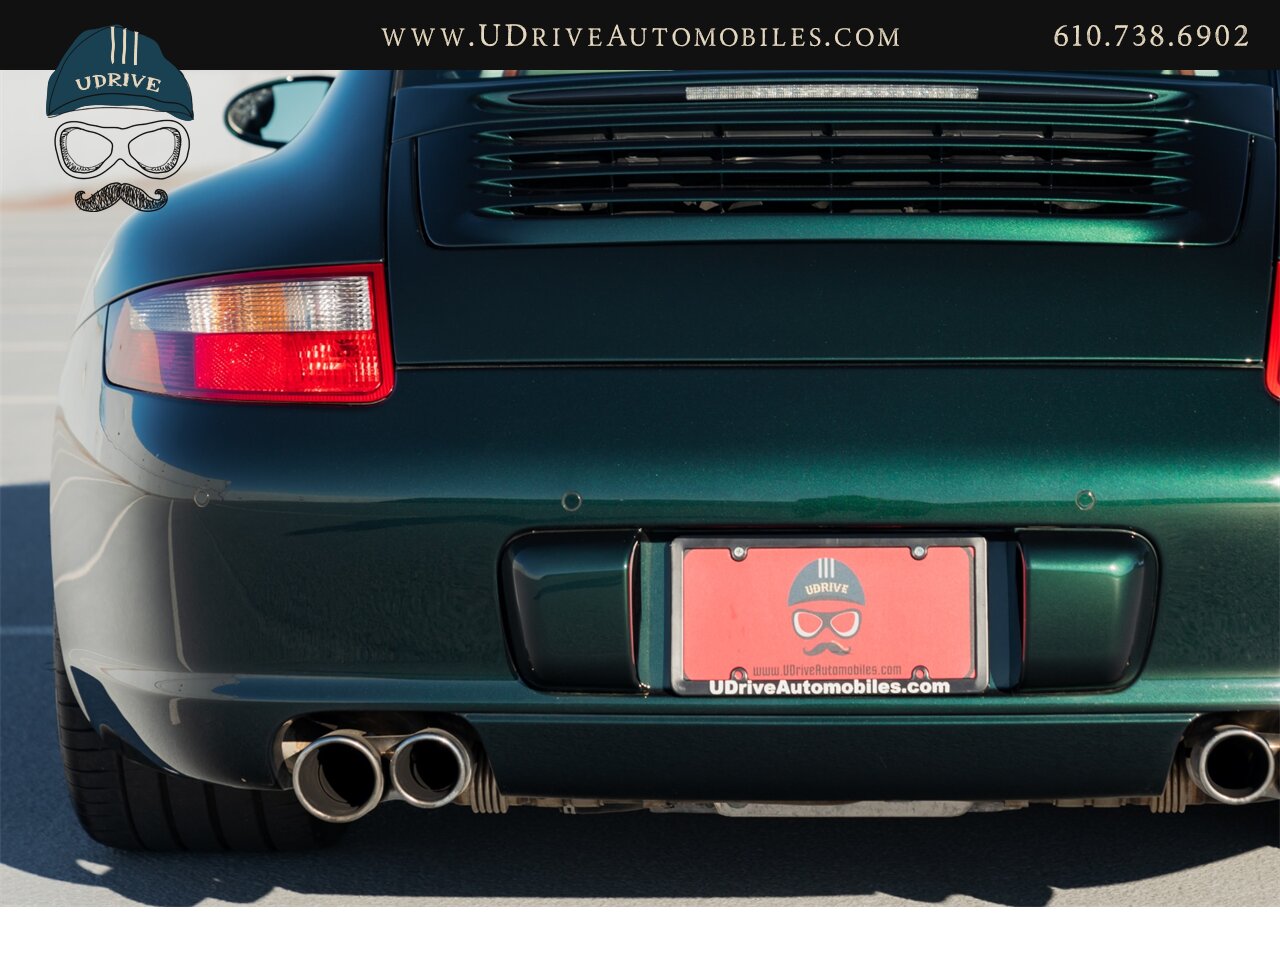 2007 Porsche 911 Carrera S 6Spd 997S RARE X51 Power Kit 381hp  1 of a Kind Forest Green over Blk/Terracotta Chrono Adap Sport Sts $113k MSRP - Photo 22 - West Chester, PA 19382